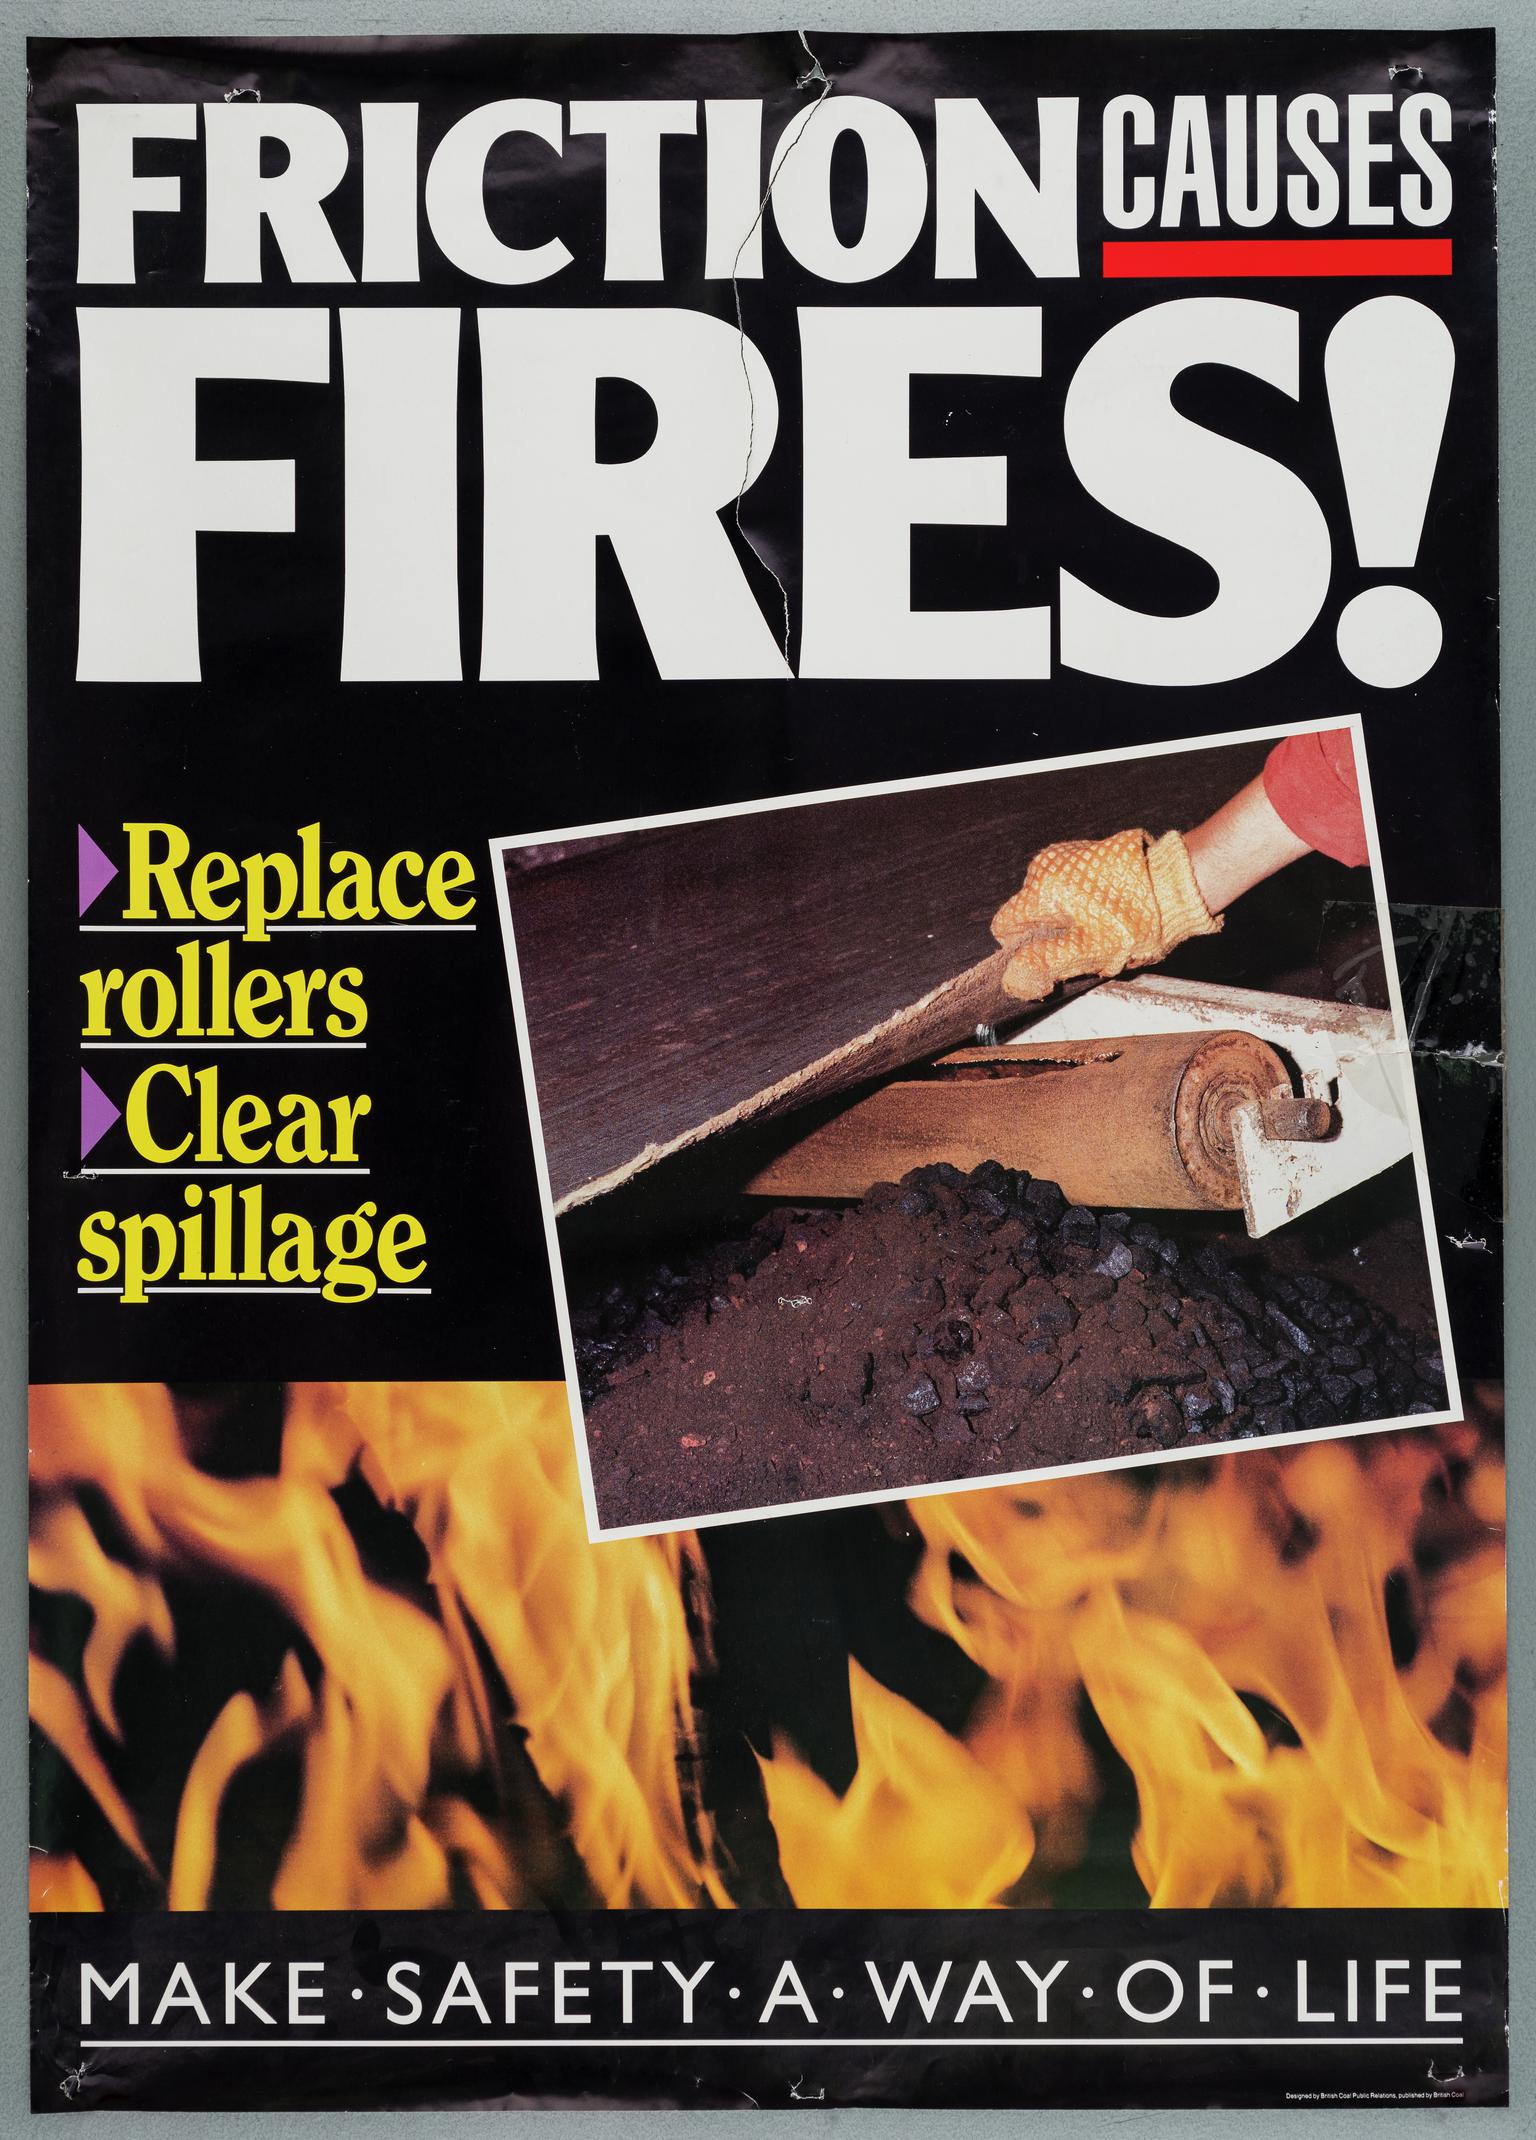 N.C.B. safety poster "Friction causes fires!"